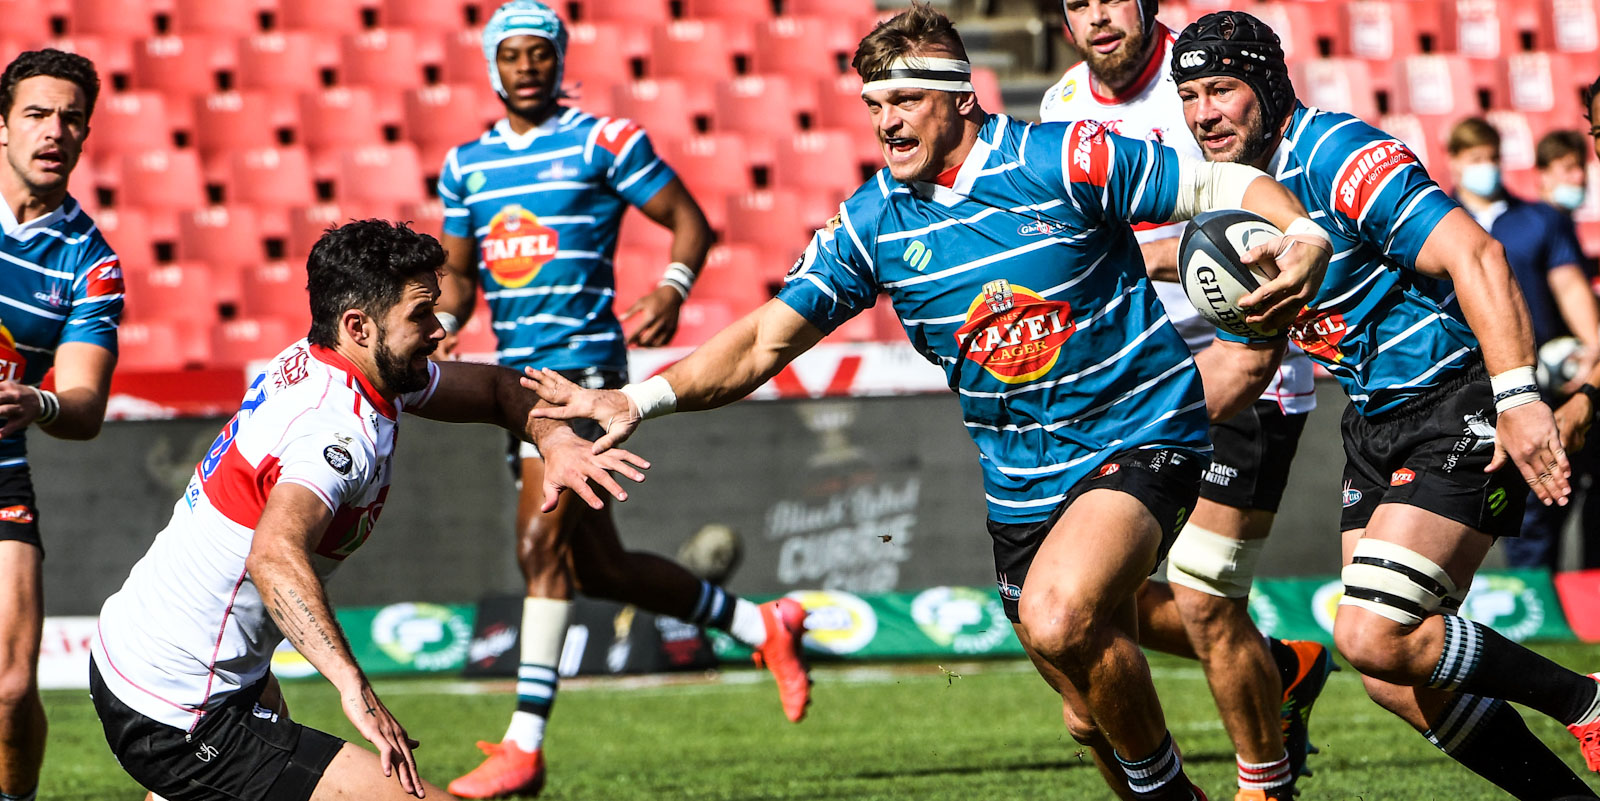 Gideon van der Merwe scored in the first minute to set the tone for Tafel Lager Griquas' win in Johannesburg.